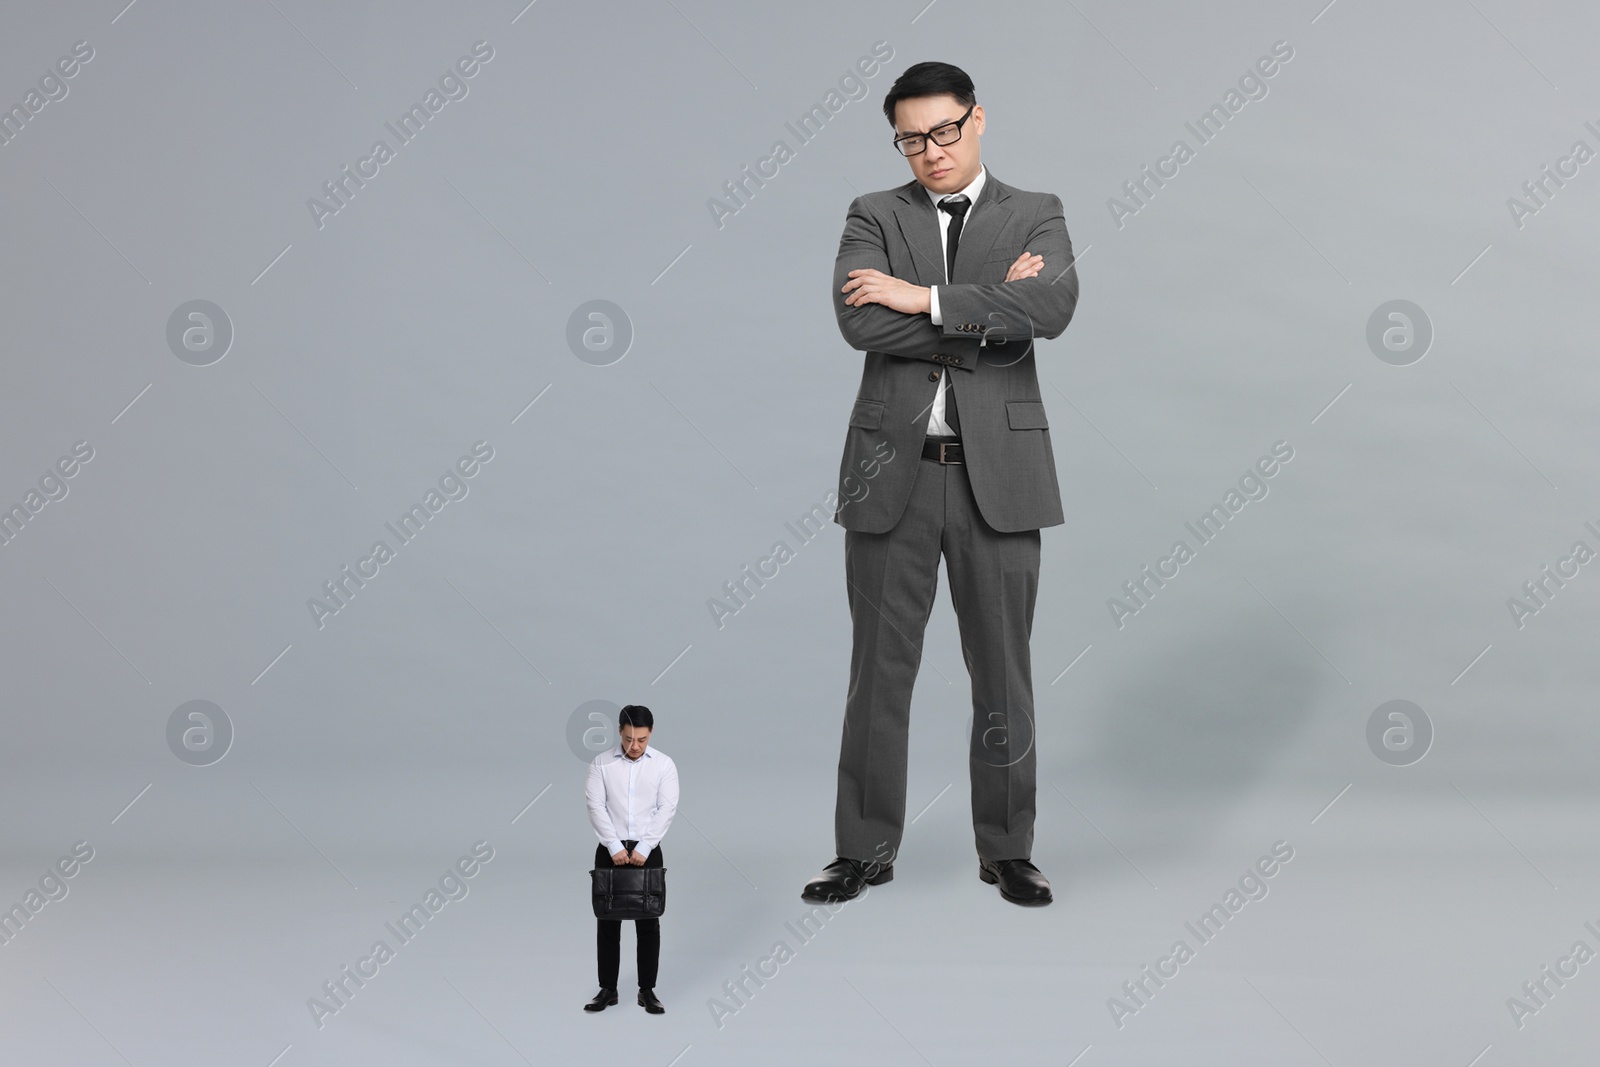 Image of Giant boss and sad small man on grey background